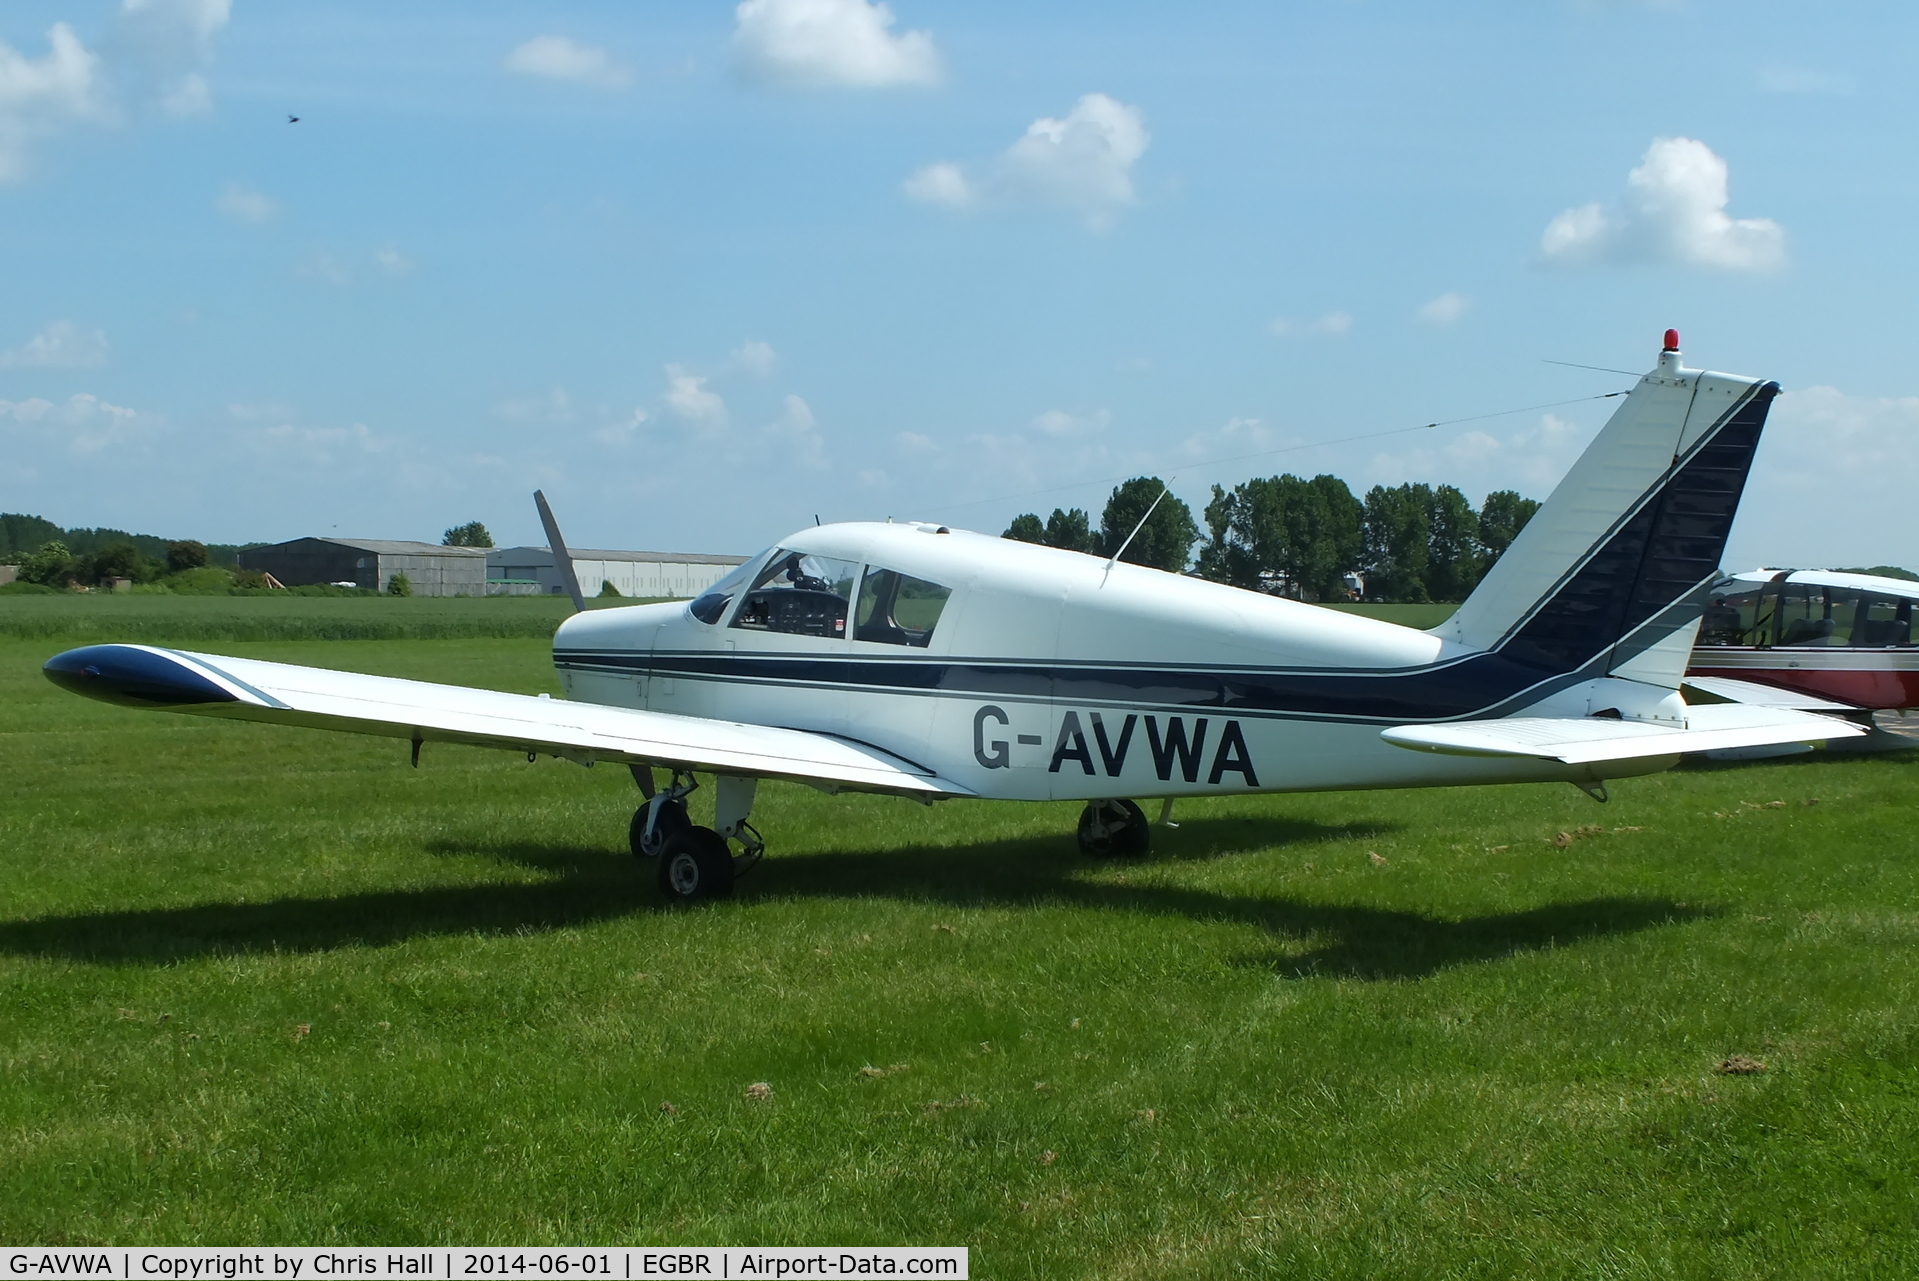 G-AVWA, 1967 Piper PA-28-140 Cherokee C/N 28-23660, at Breighton's Open Cockpit & Biplane Fly-in, 2014